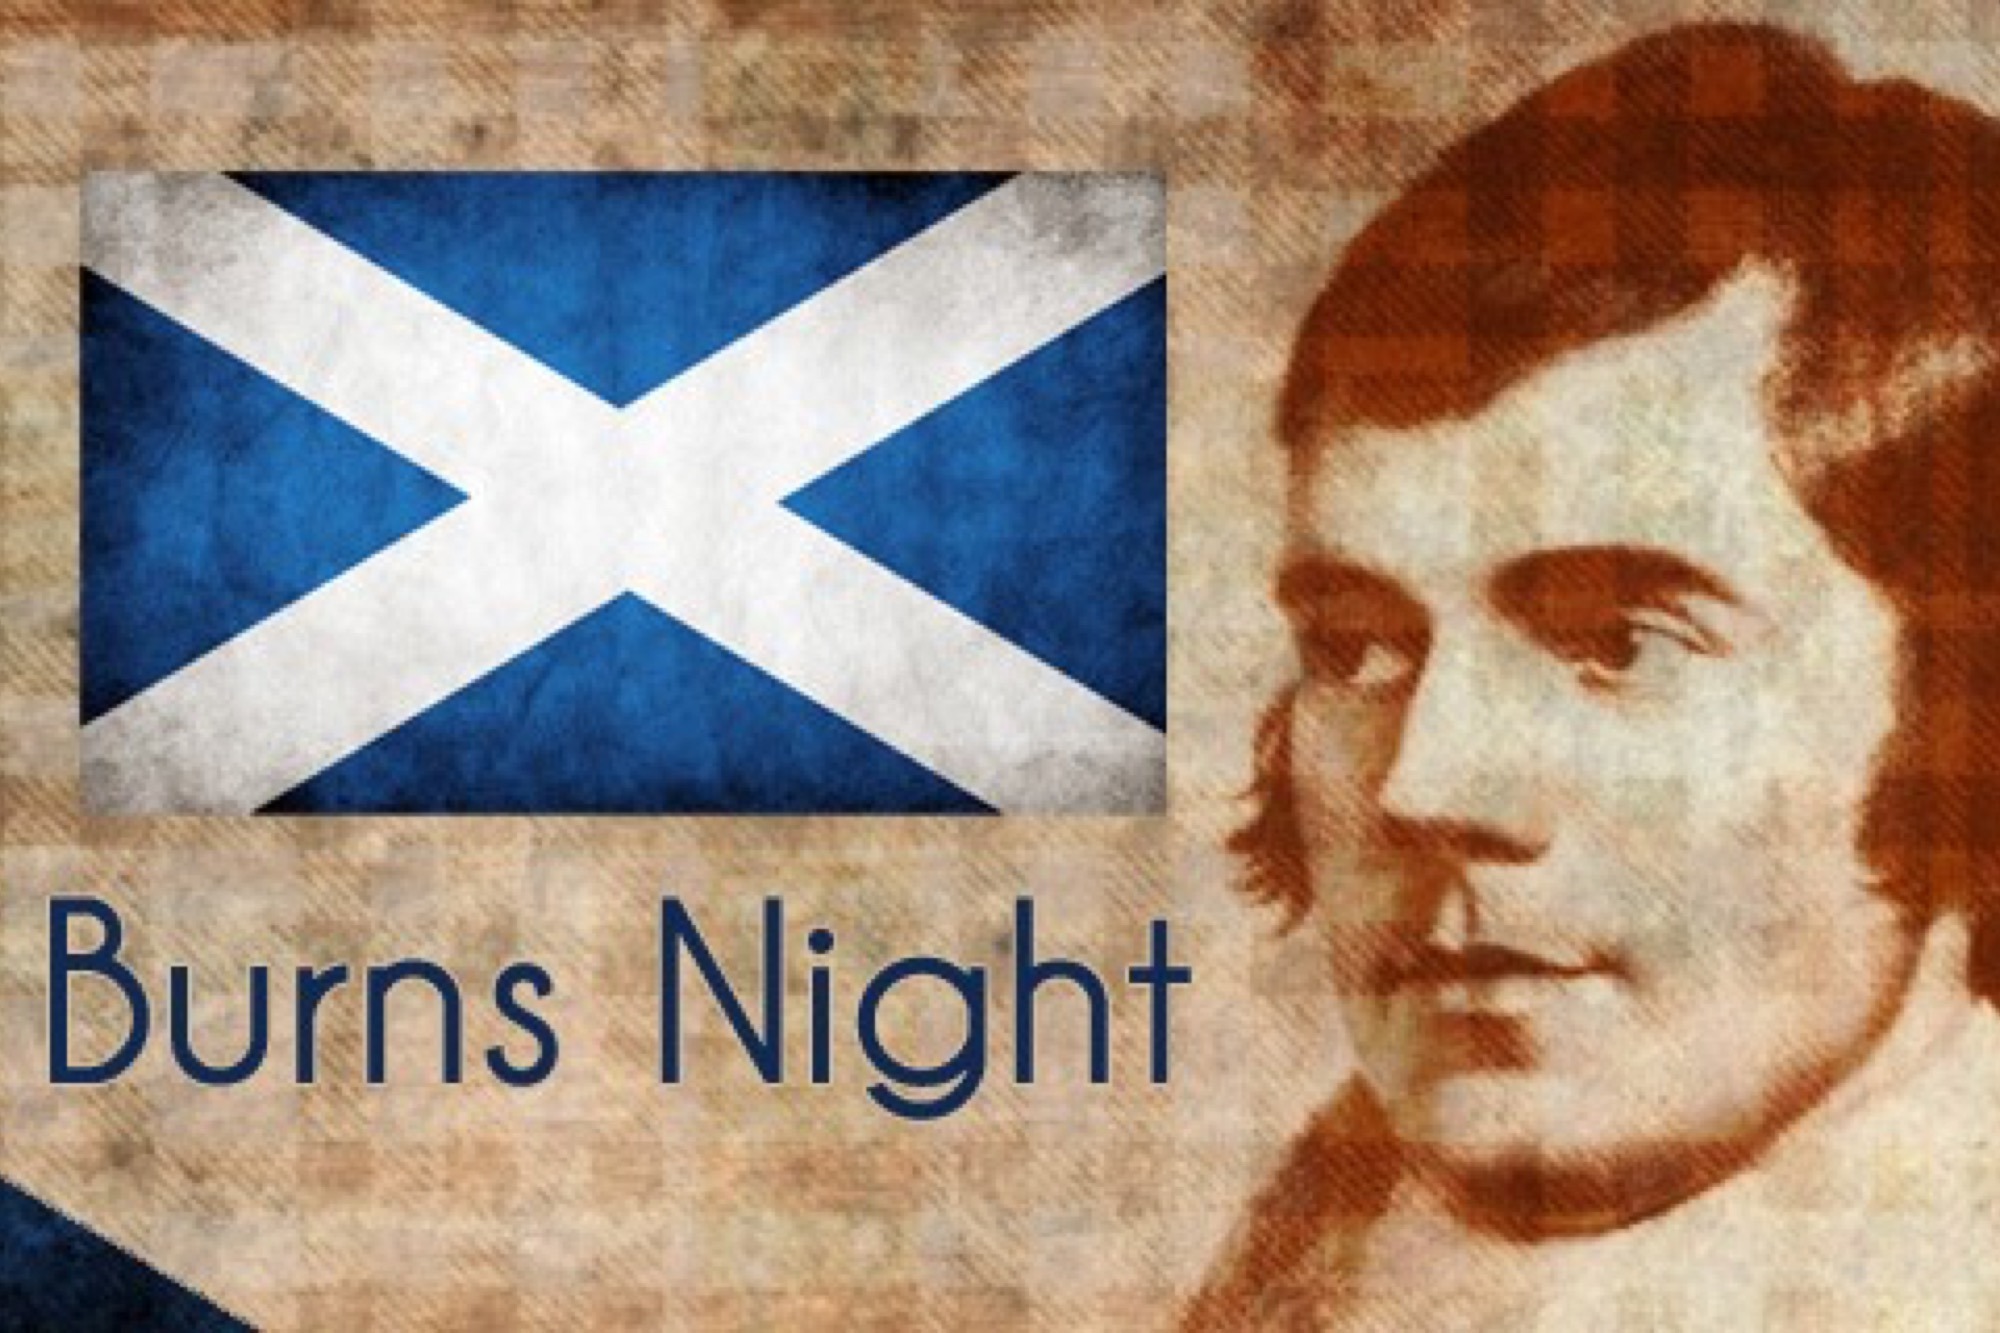 Burns Night: Date, Significance And Why Do We Celebrate It?